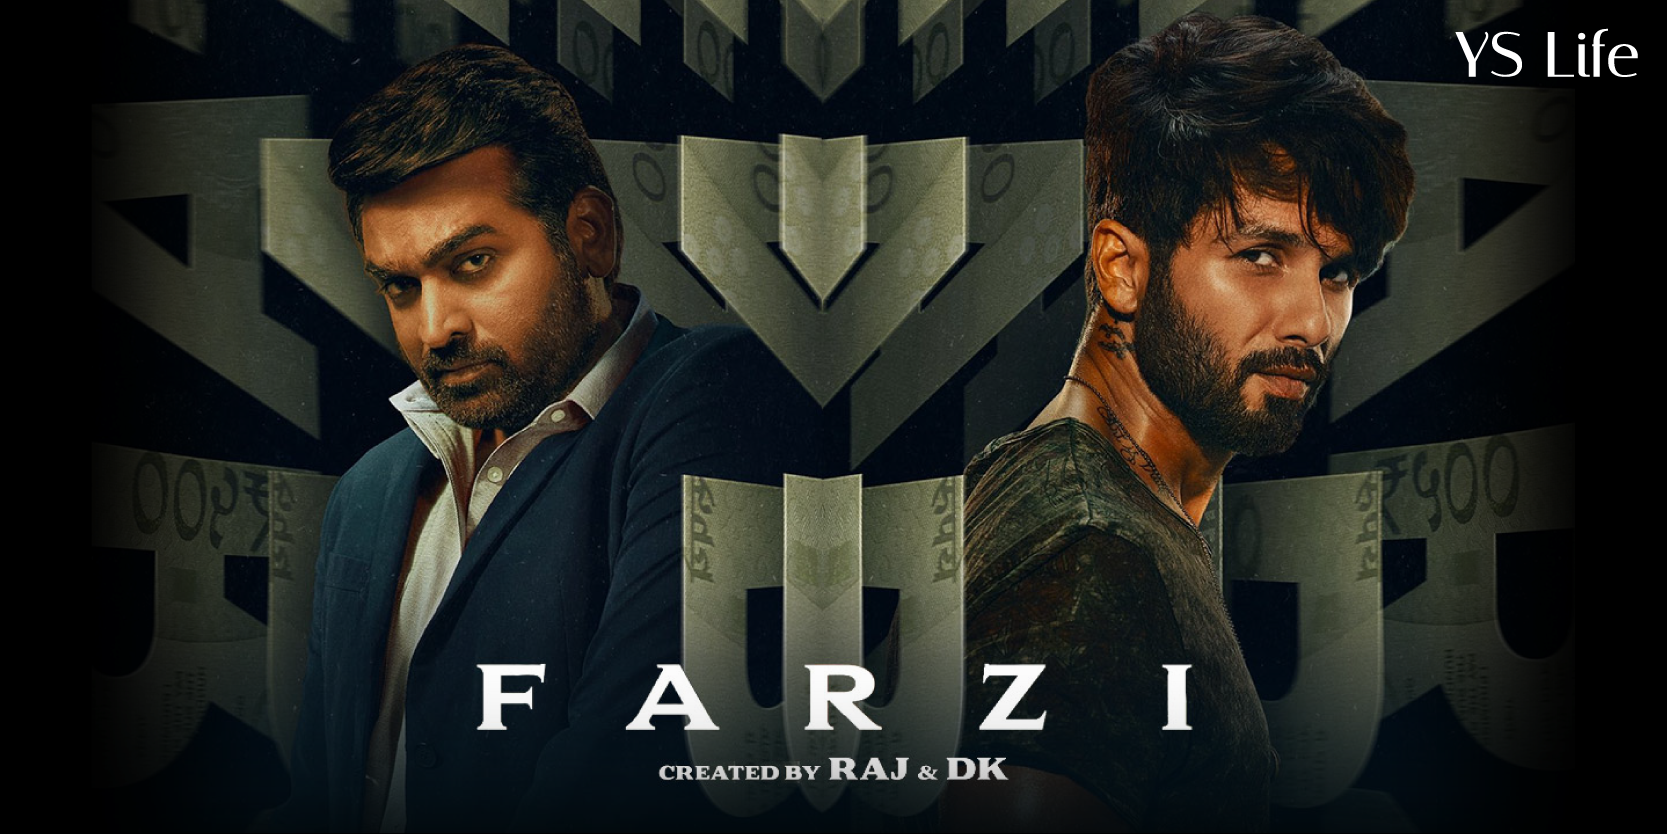 Farzi review: Vijay Sethupathi and Shahid Kapoor deliver on point in this tumultuous, binge-worthy ride